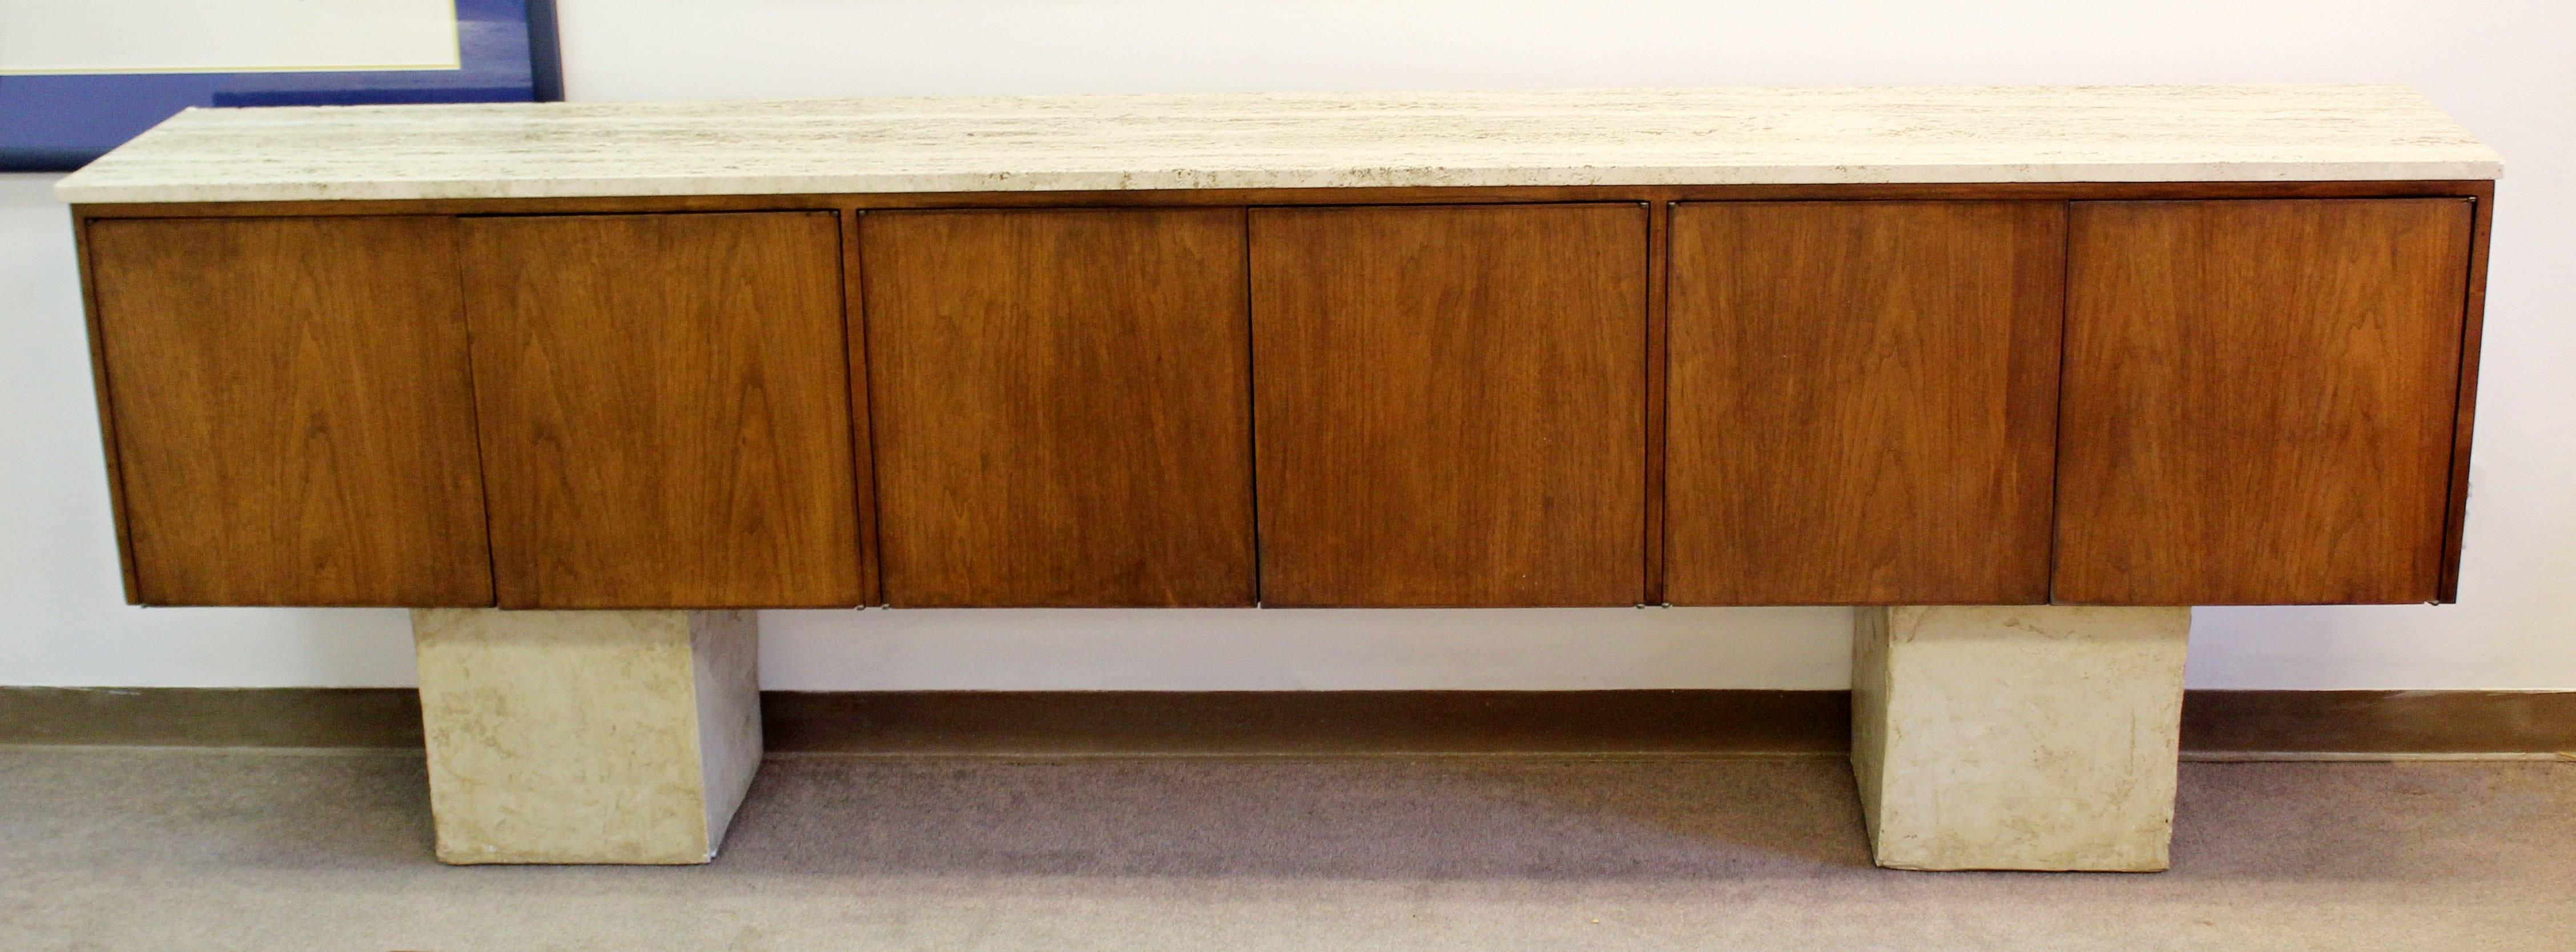 For your consideration is an amazing floating wall-mounted 9 feet long credenza, with a travertine top, attributed to either Florence Knoll or Harvey Probber. In excellent condition. It is shown in the pictures on top of two bases. The dimensions